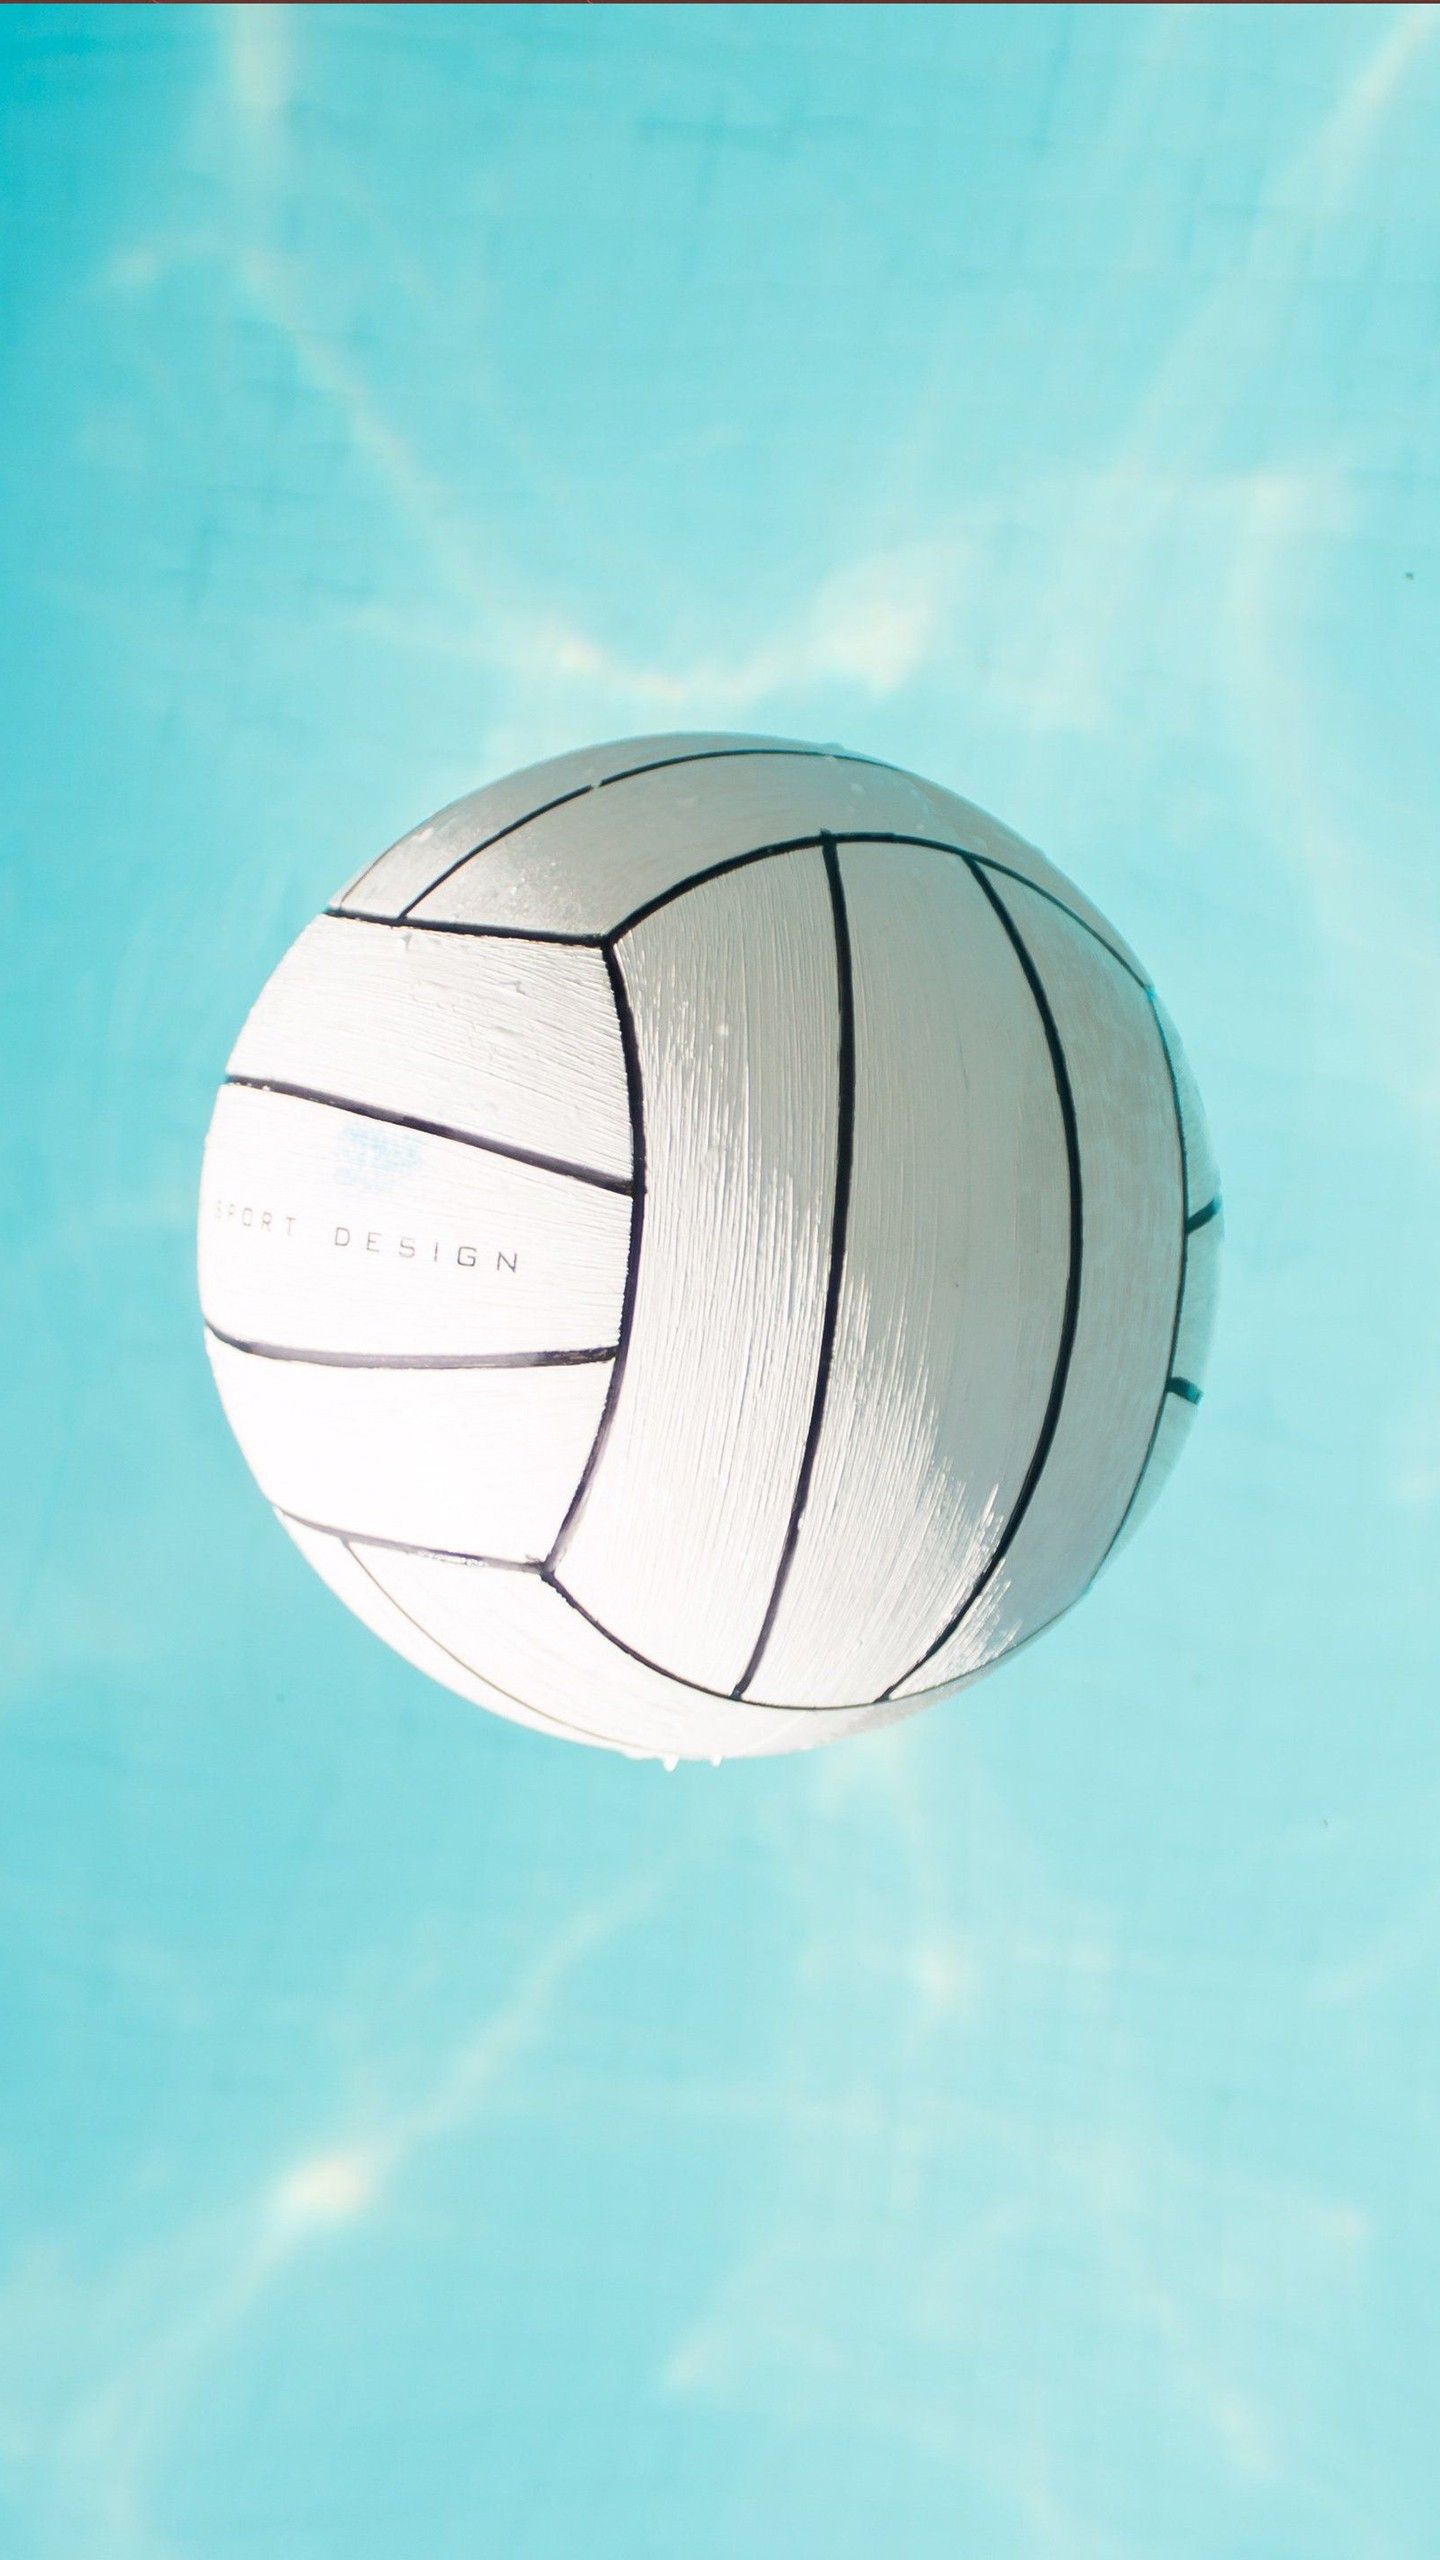 White Volleyball In Blue Background 4K 5K HD Volleyball Wallpaper